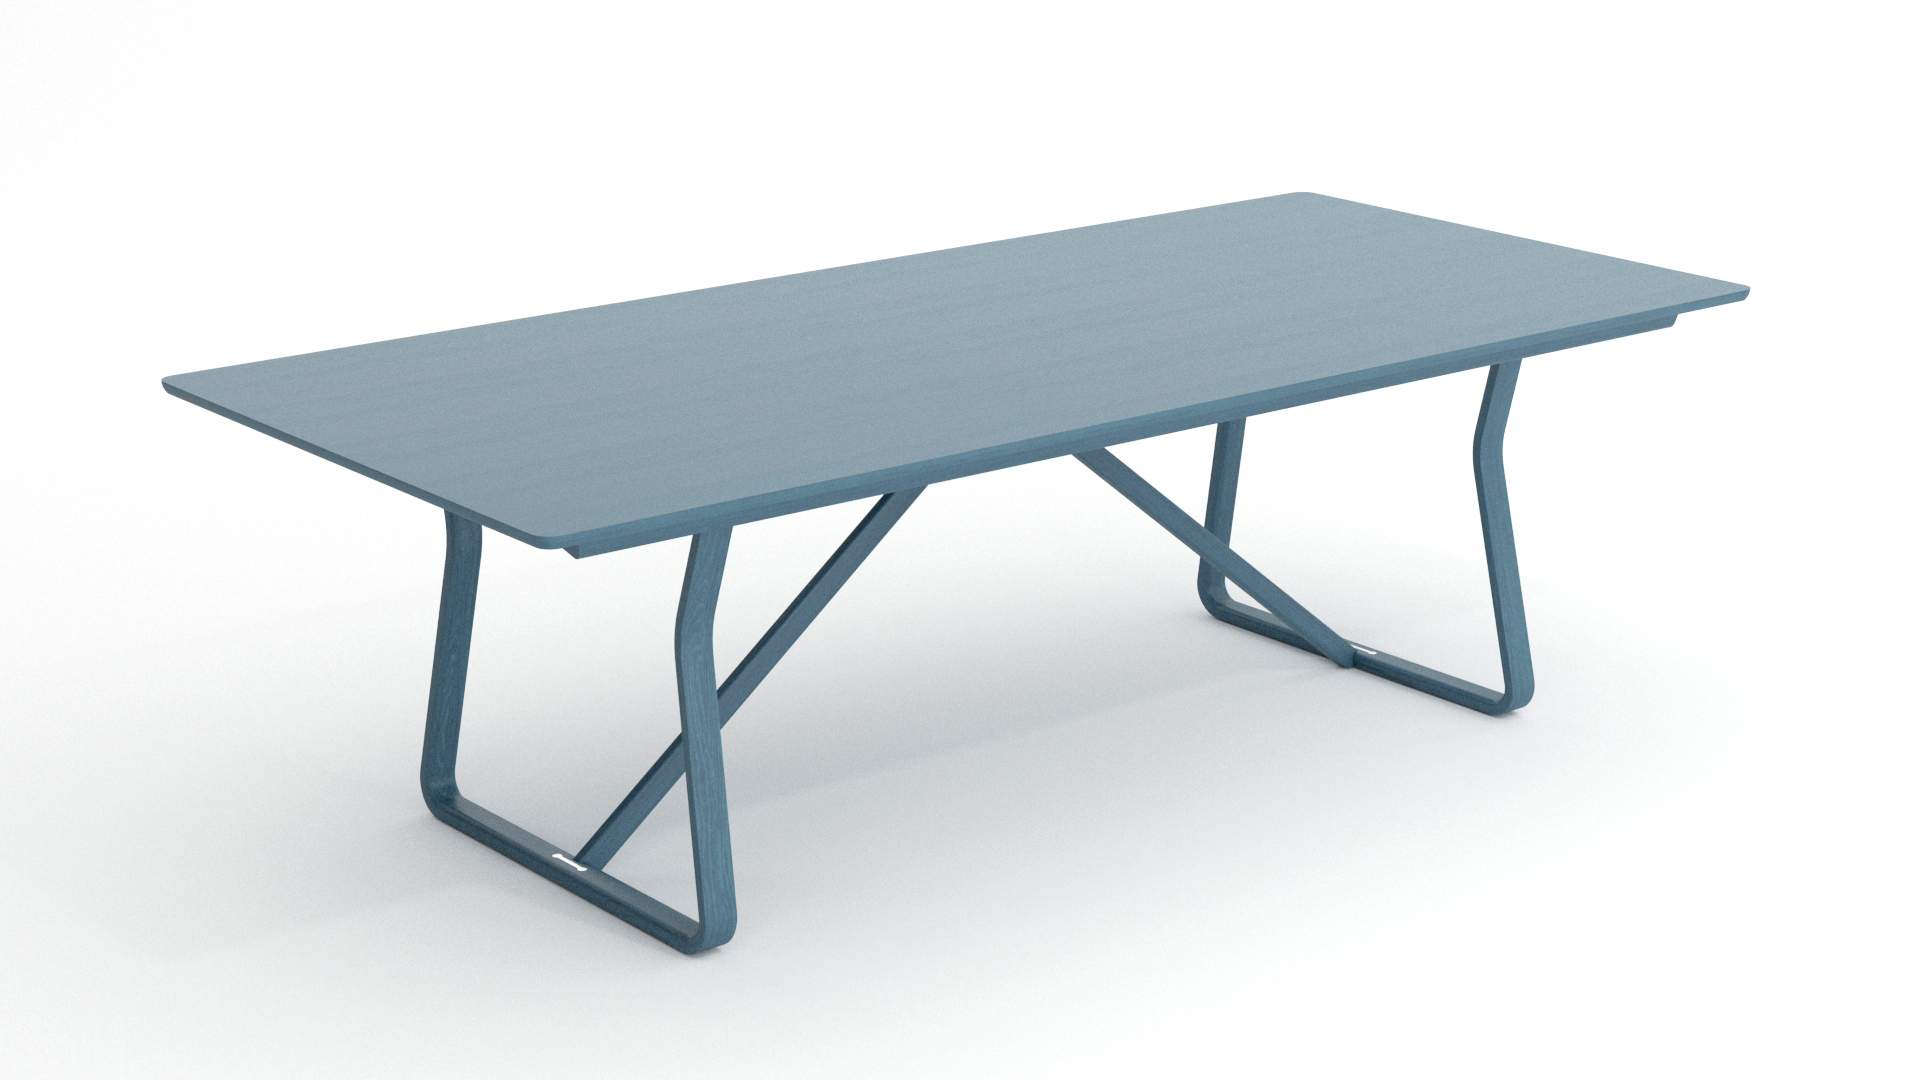 Blue folding table for office space.